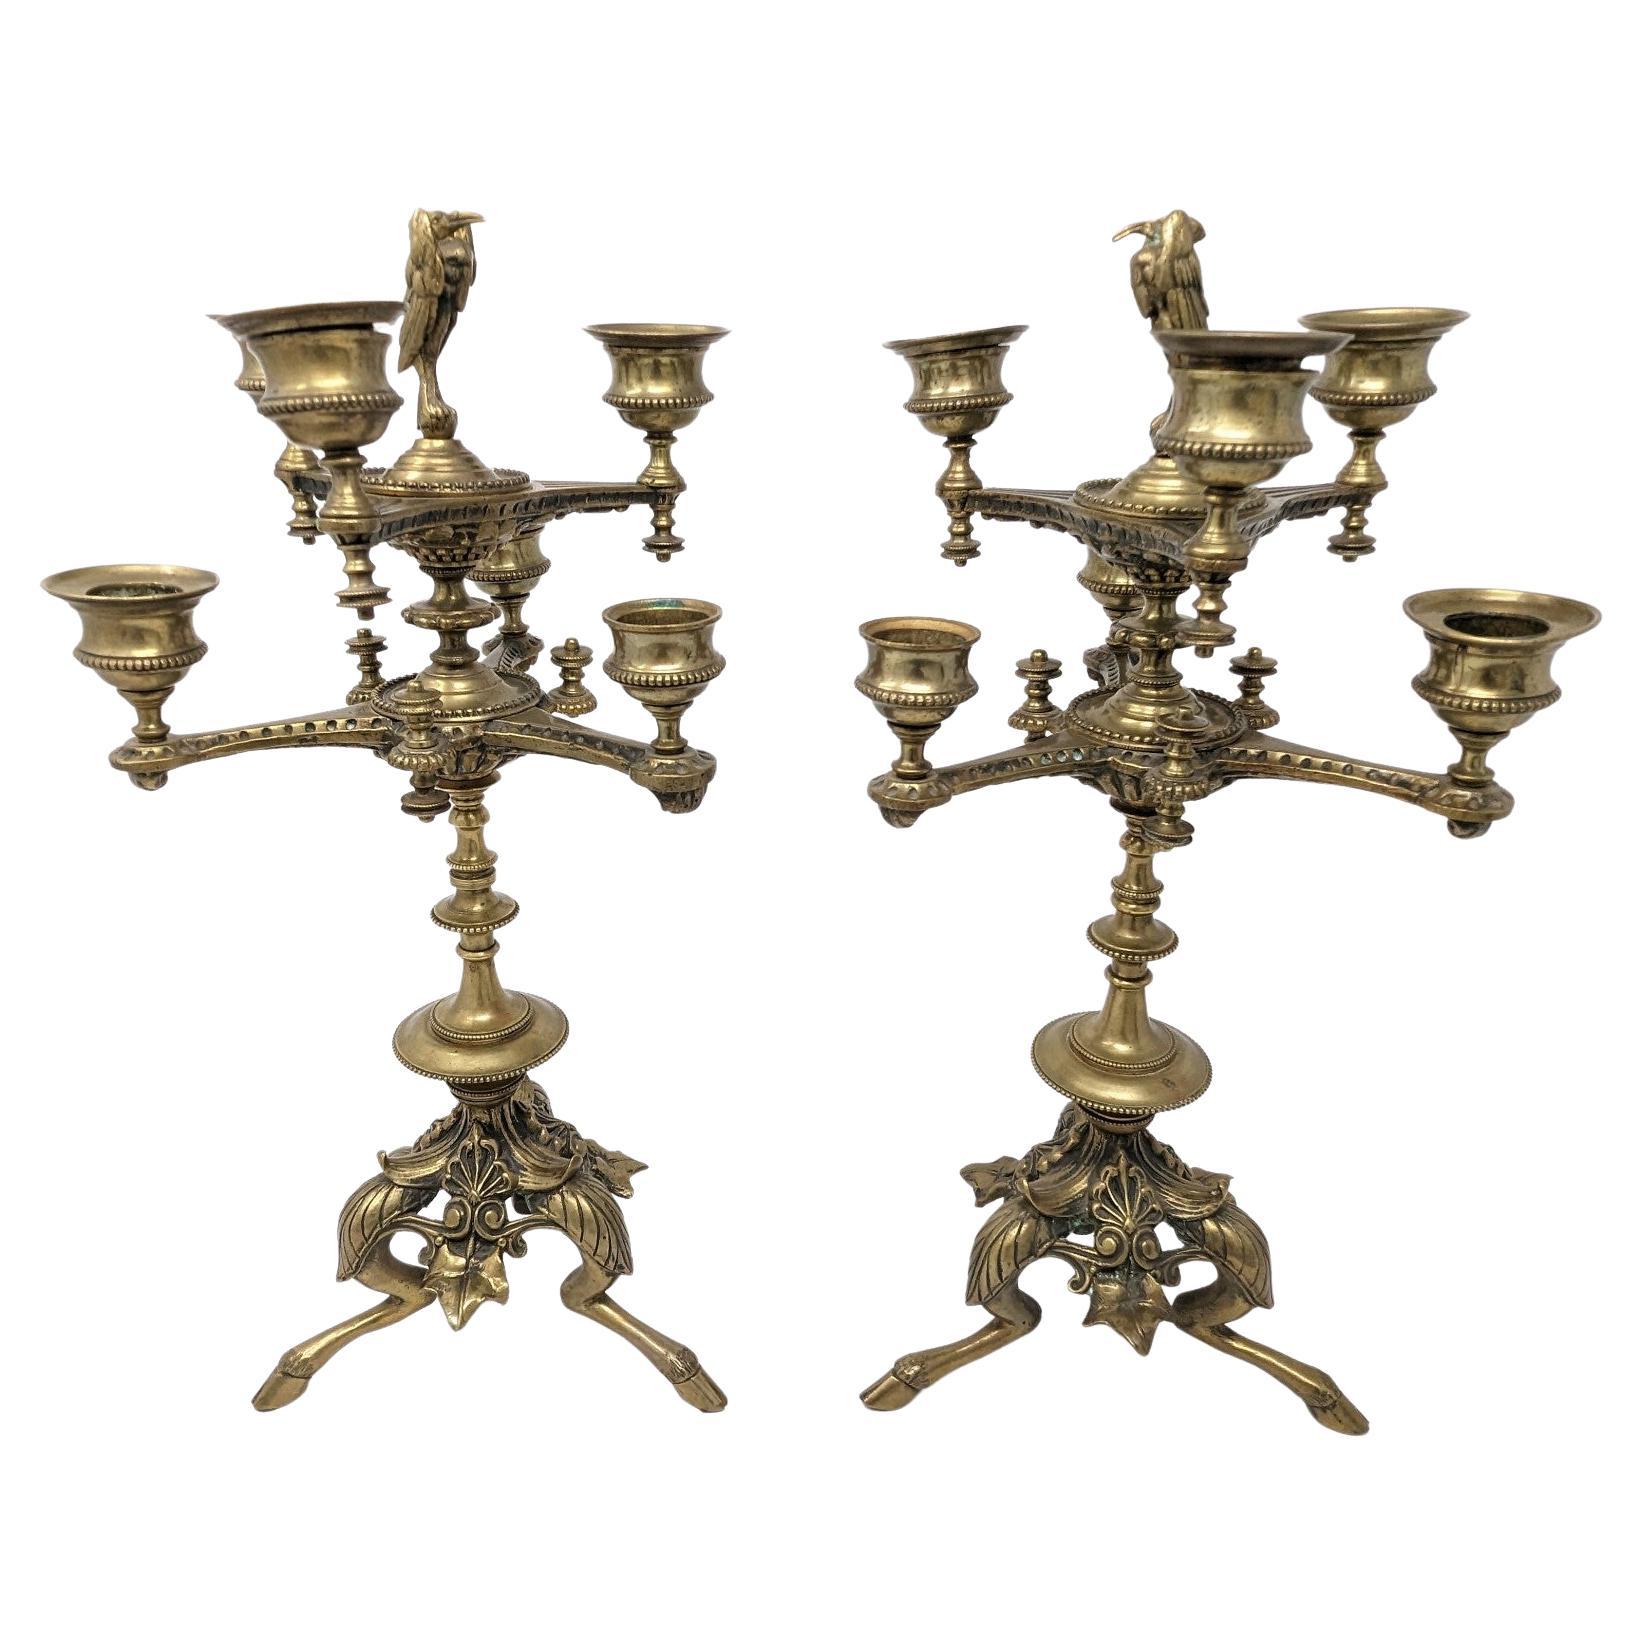 Pair of Antique Candelabras, 19th Century European Brass Candlesticks Footed For Sale